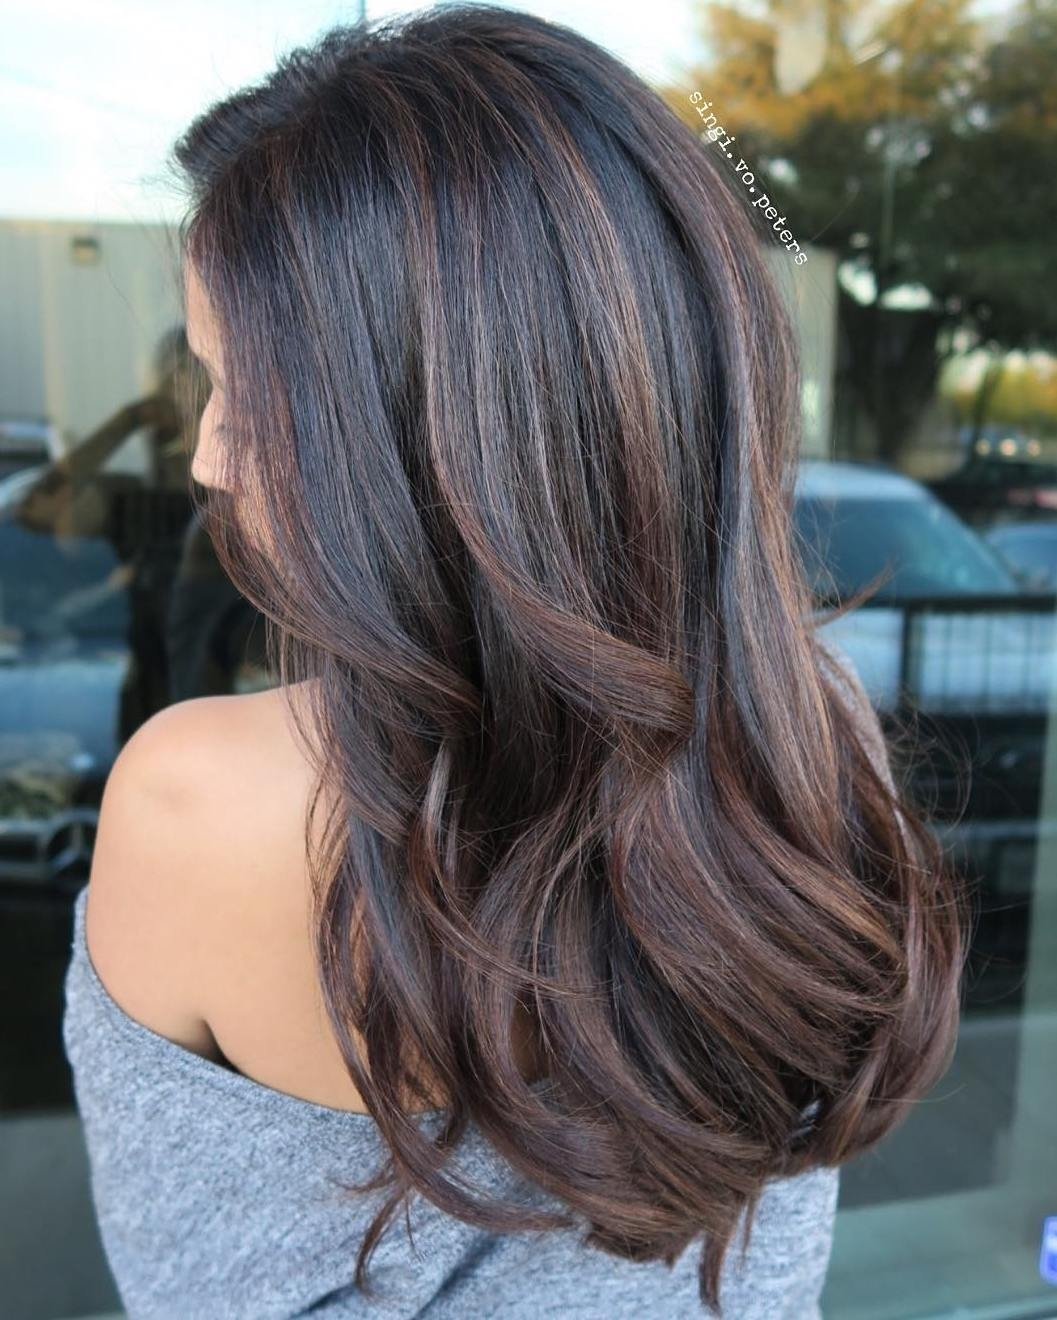 10 Gorgeous Hair Color Ideas For Dark Hair 70 balayage hair color ideas with blonde brown and caramel highlights 10 2024